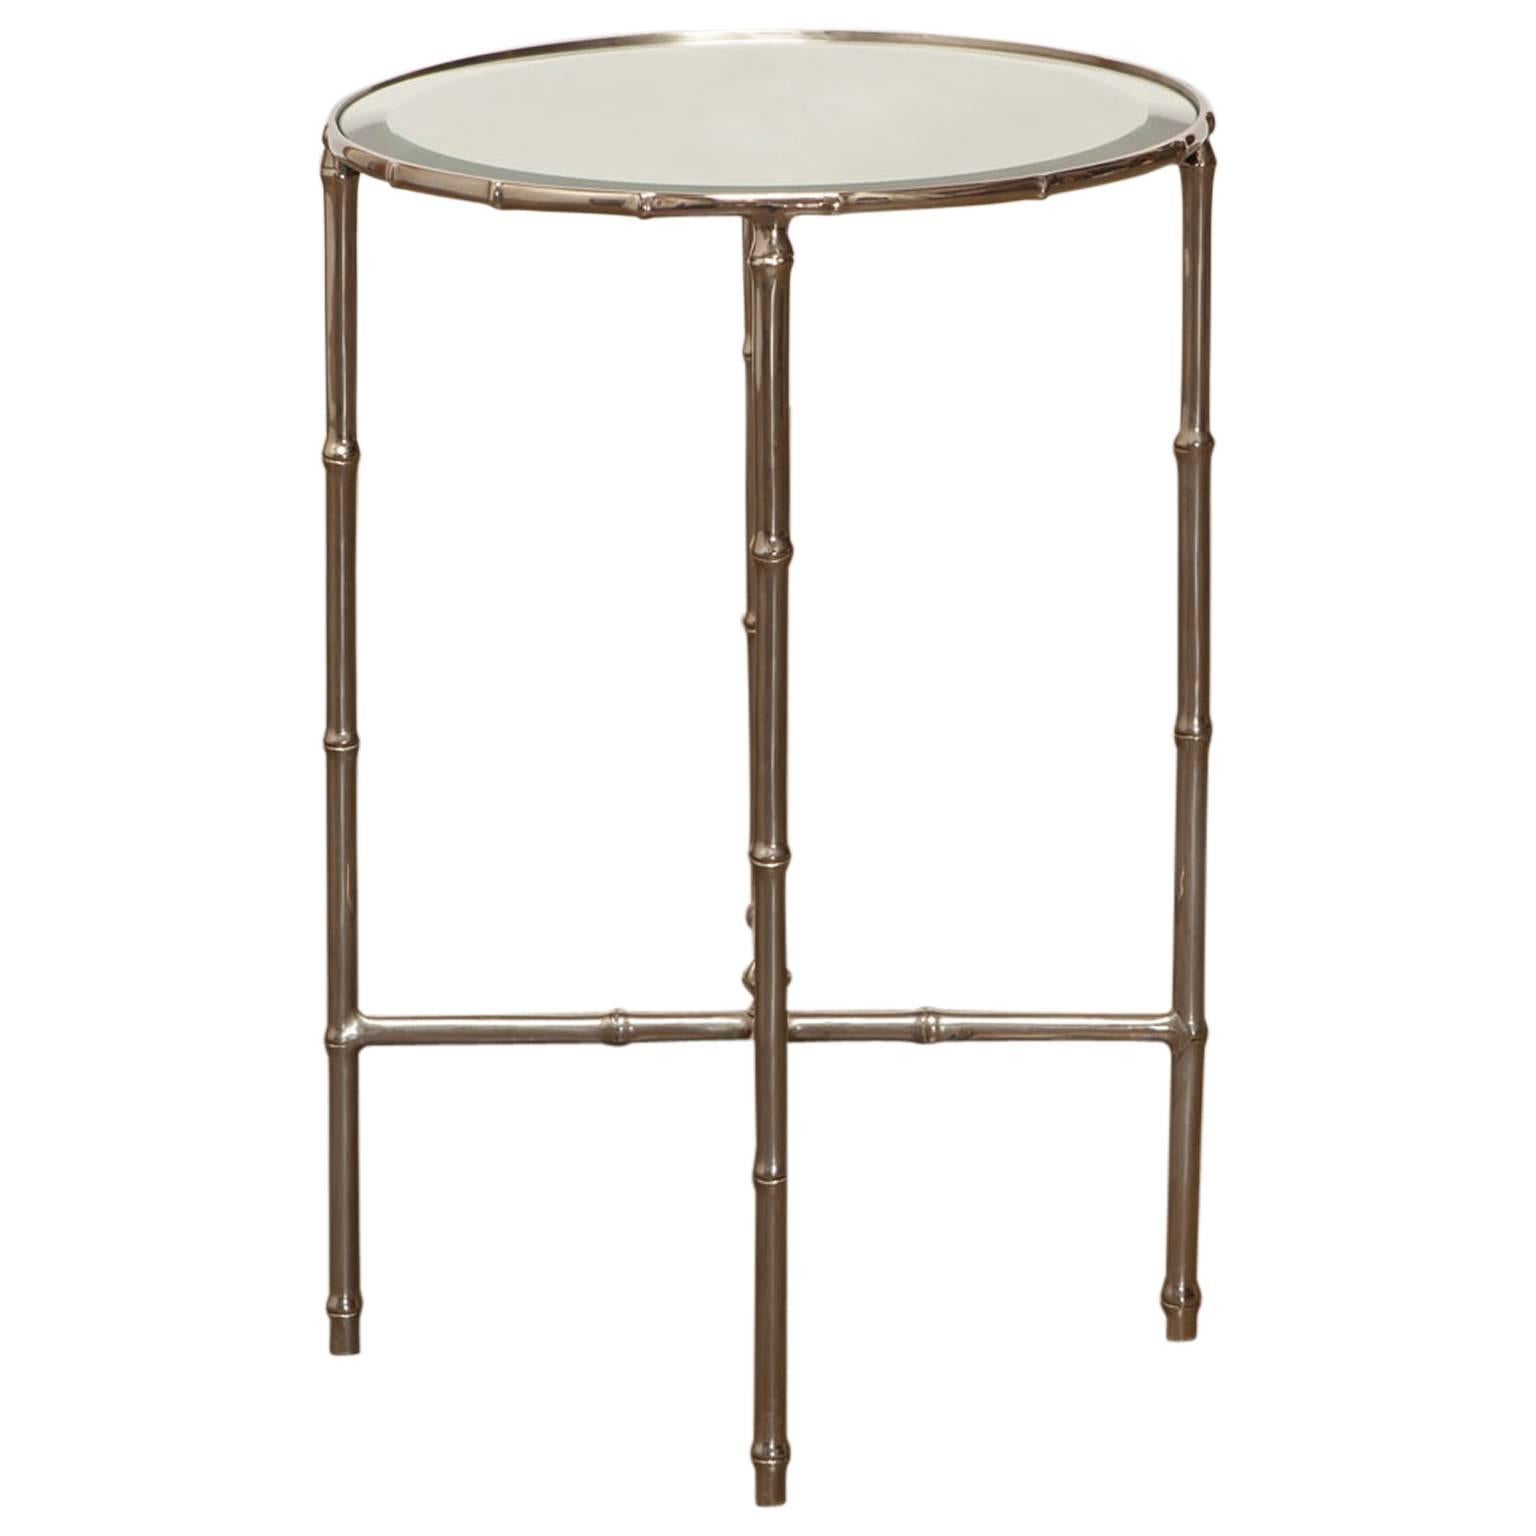 Mastercraft Nickel Faux Bamboo Round Drinks Table